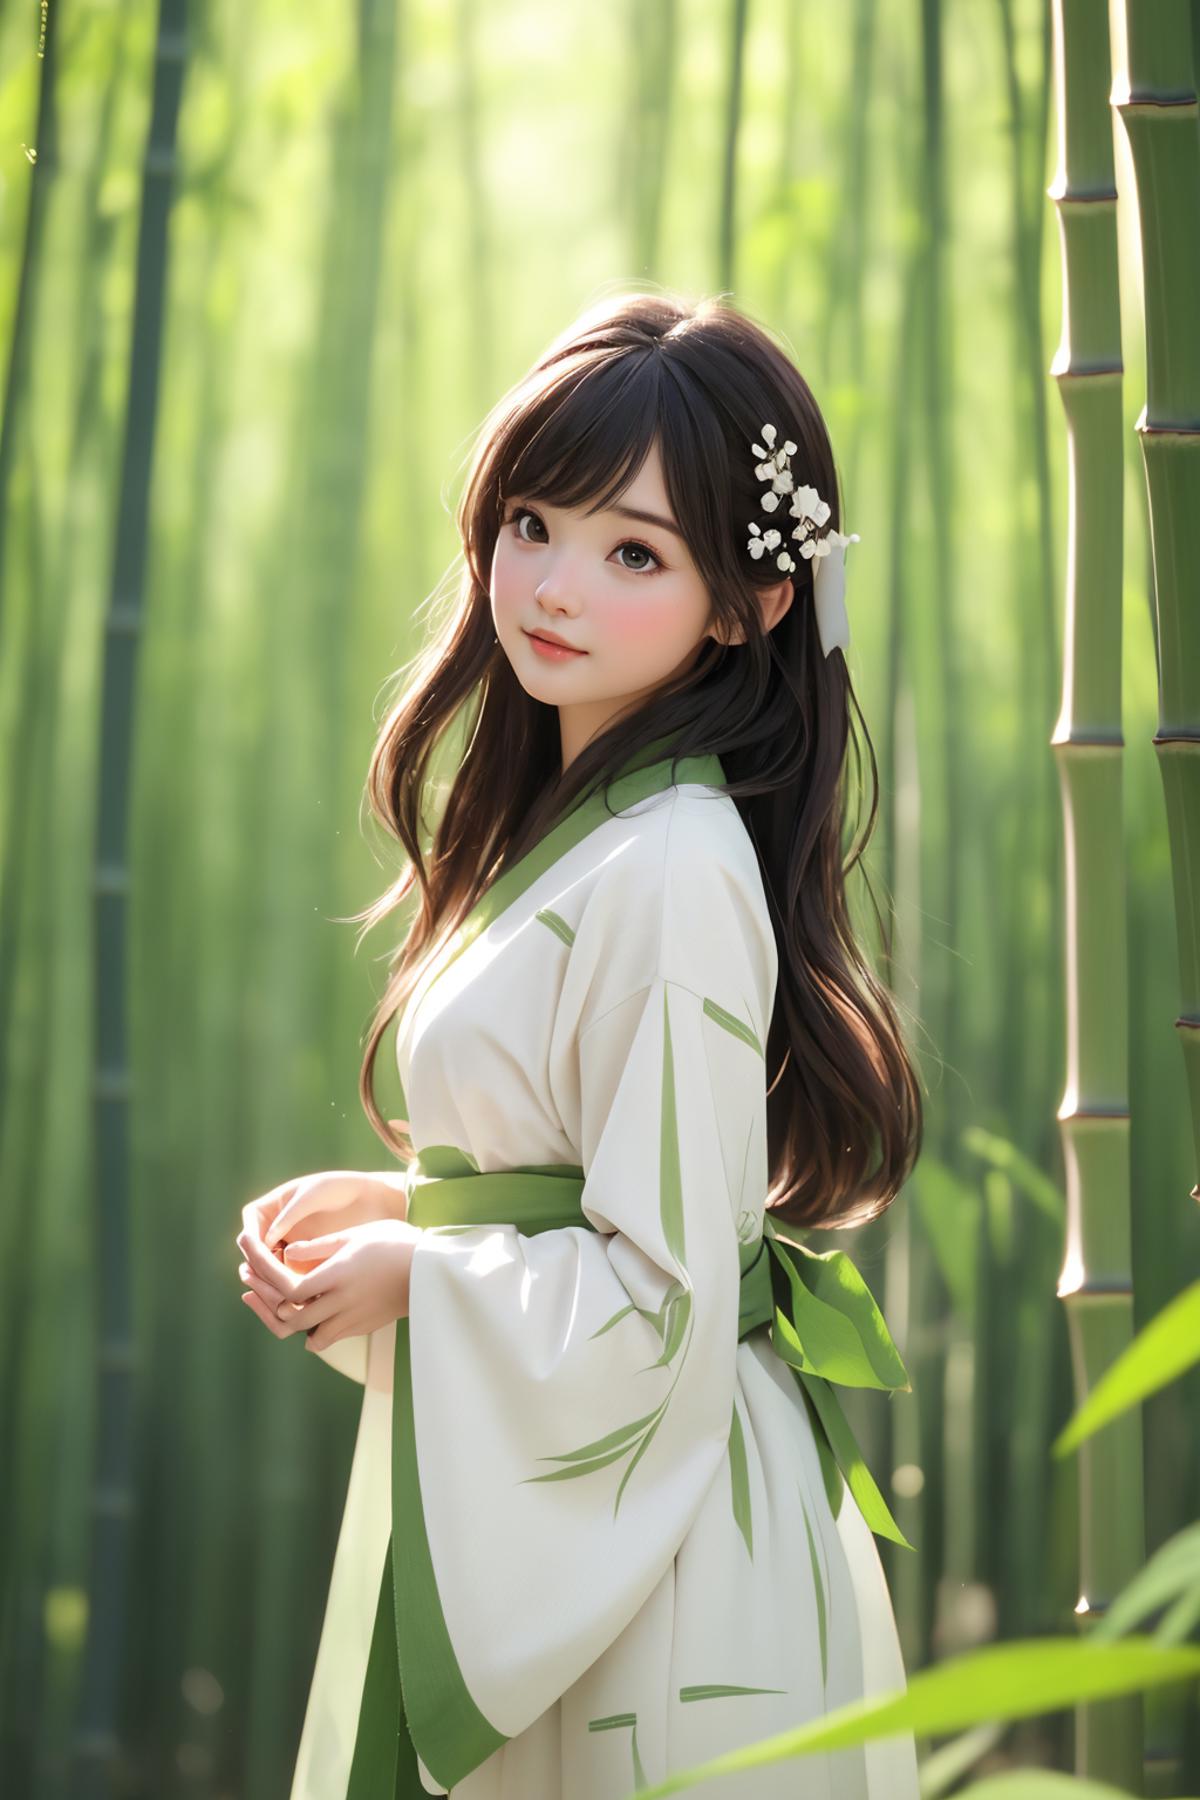 Cute girl in the bamboo forest image by joyy114